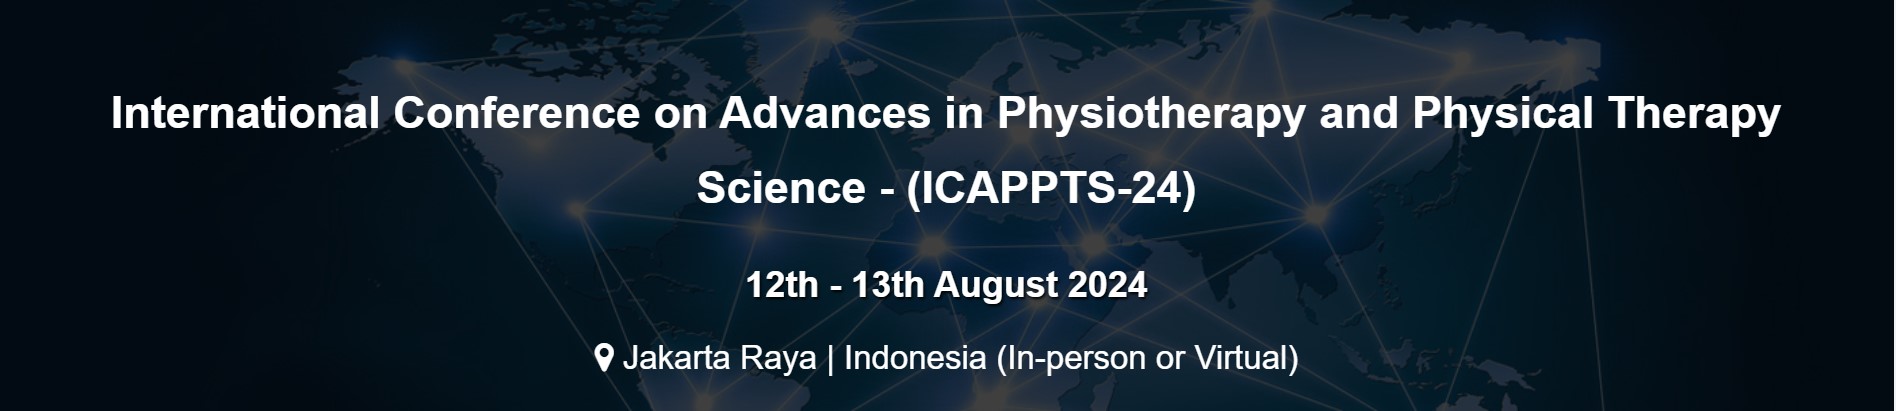 INTERNATIONAL CONFERENCE ON ADVANCES IN PHYSIOTHERAPY AND PHYSICAL THERAPY SCIENCE